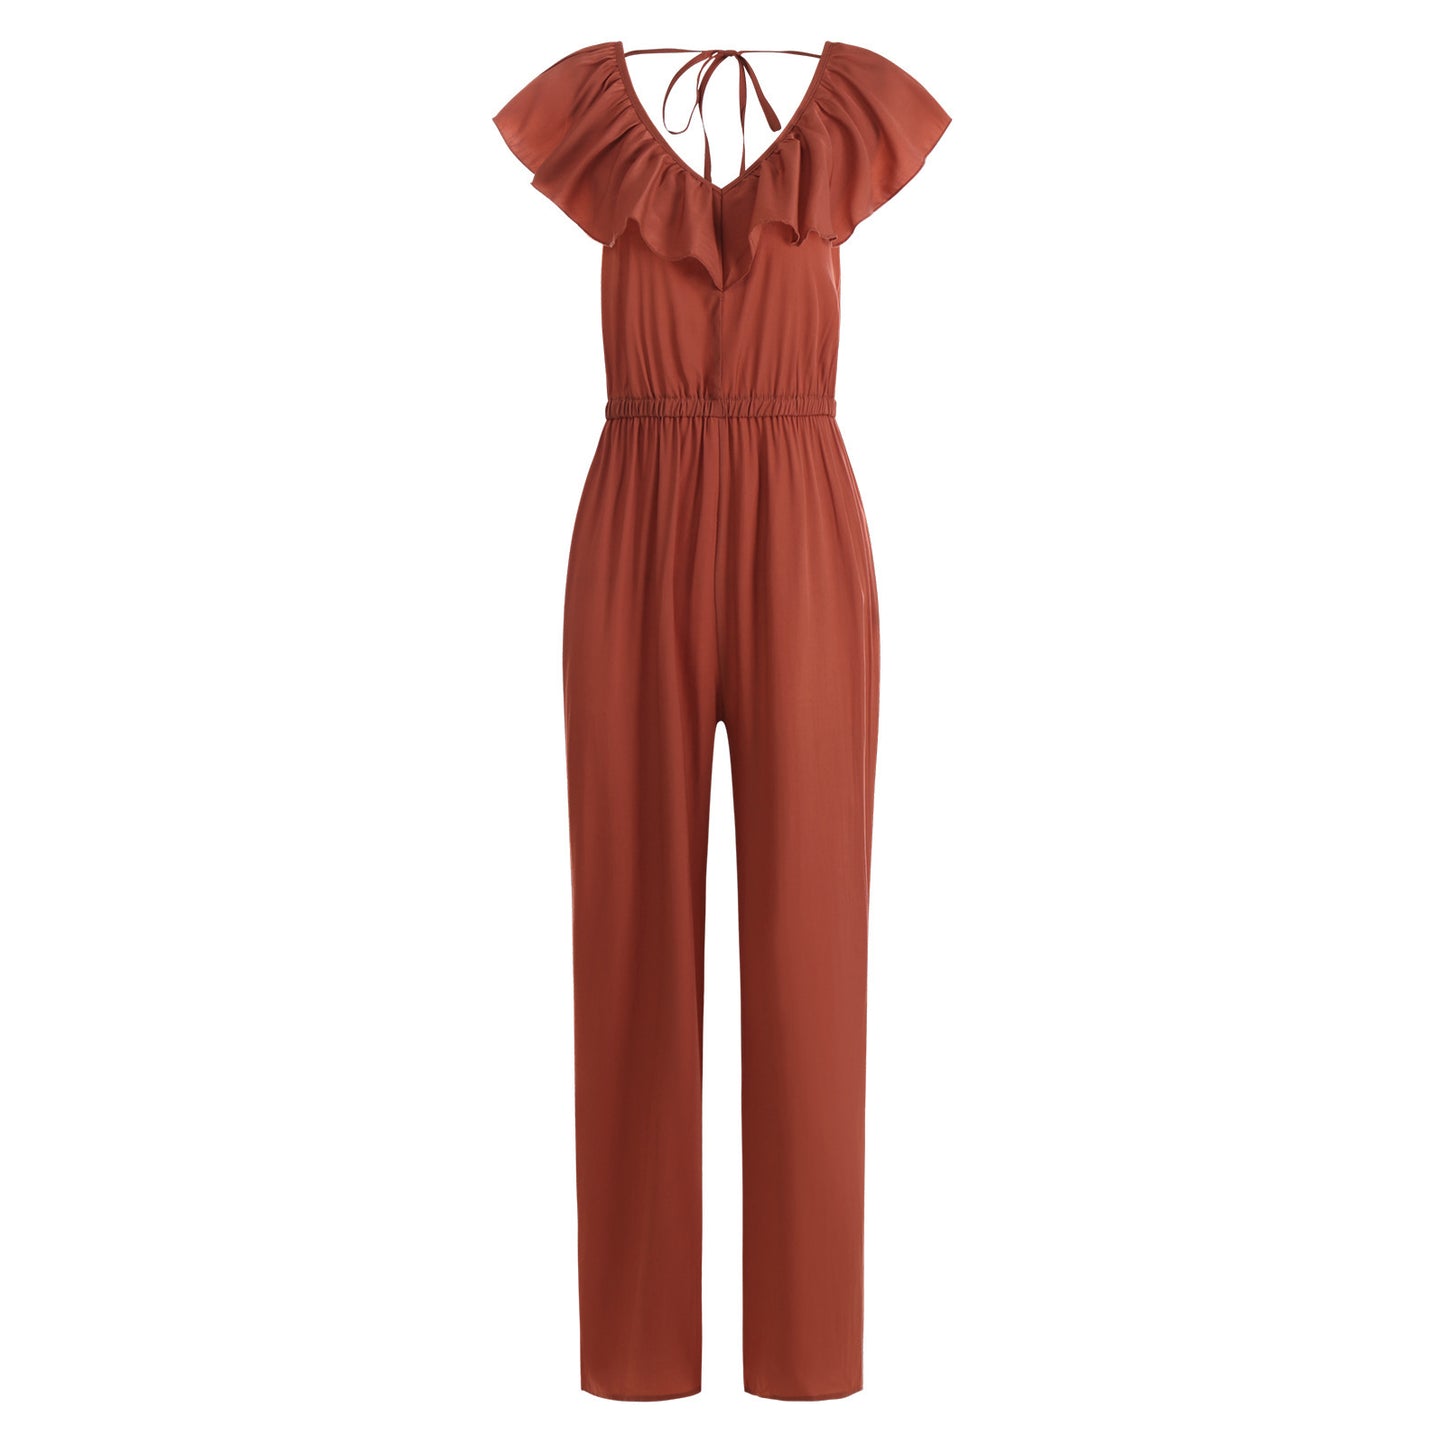 European And American Women's Solid Color Open Back Jumpsuit Summer Off Shoulder Casual Sundress Women Beachwear Jumpsuit Ruffle High Waist Jumpsuits Female Overalls Body Mujer.